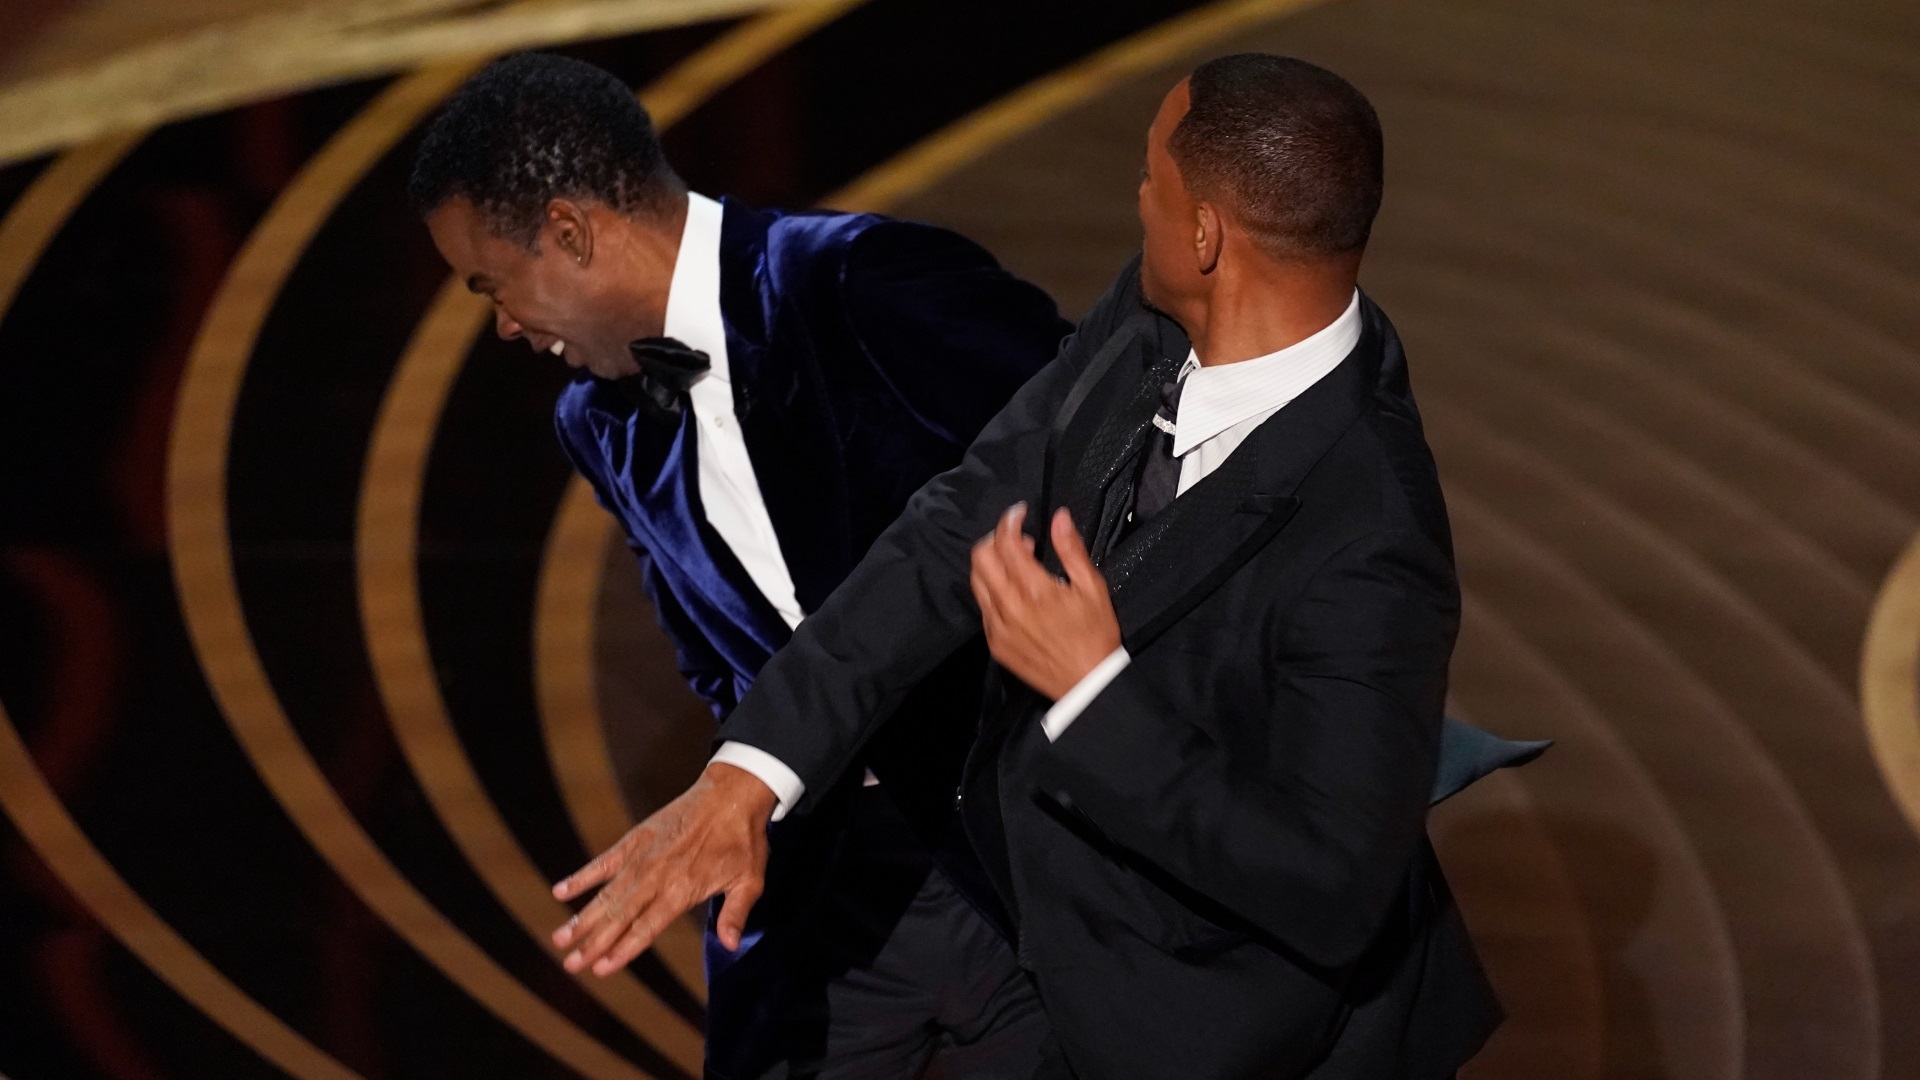 Will Smith SLAPS Chris Rock at the Academy Awards The Movie Blog